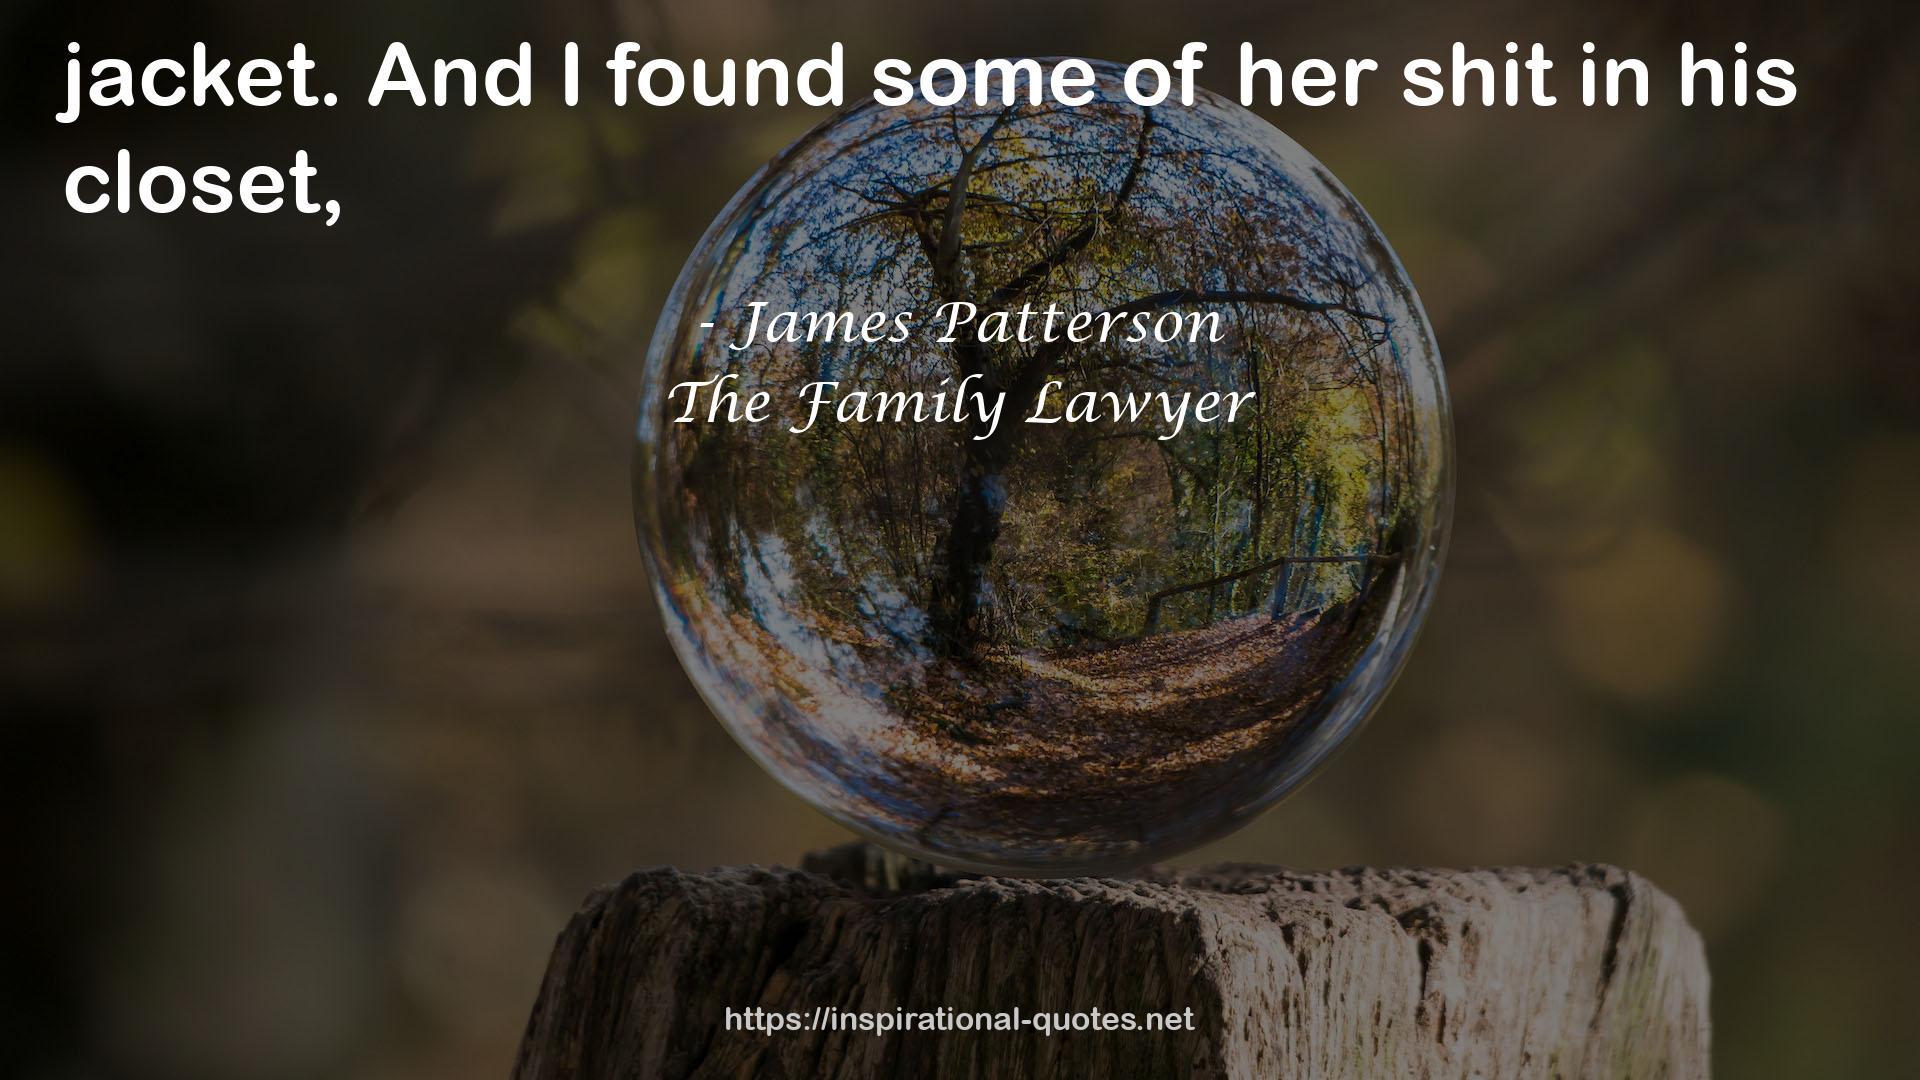 The Family Lawyer QUOTES